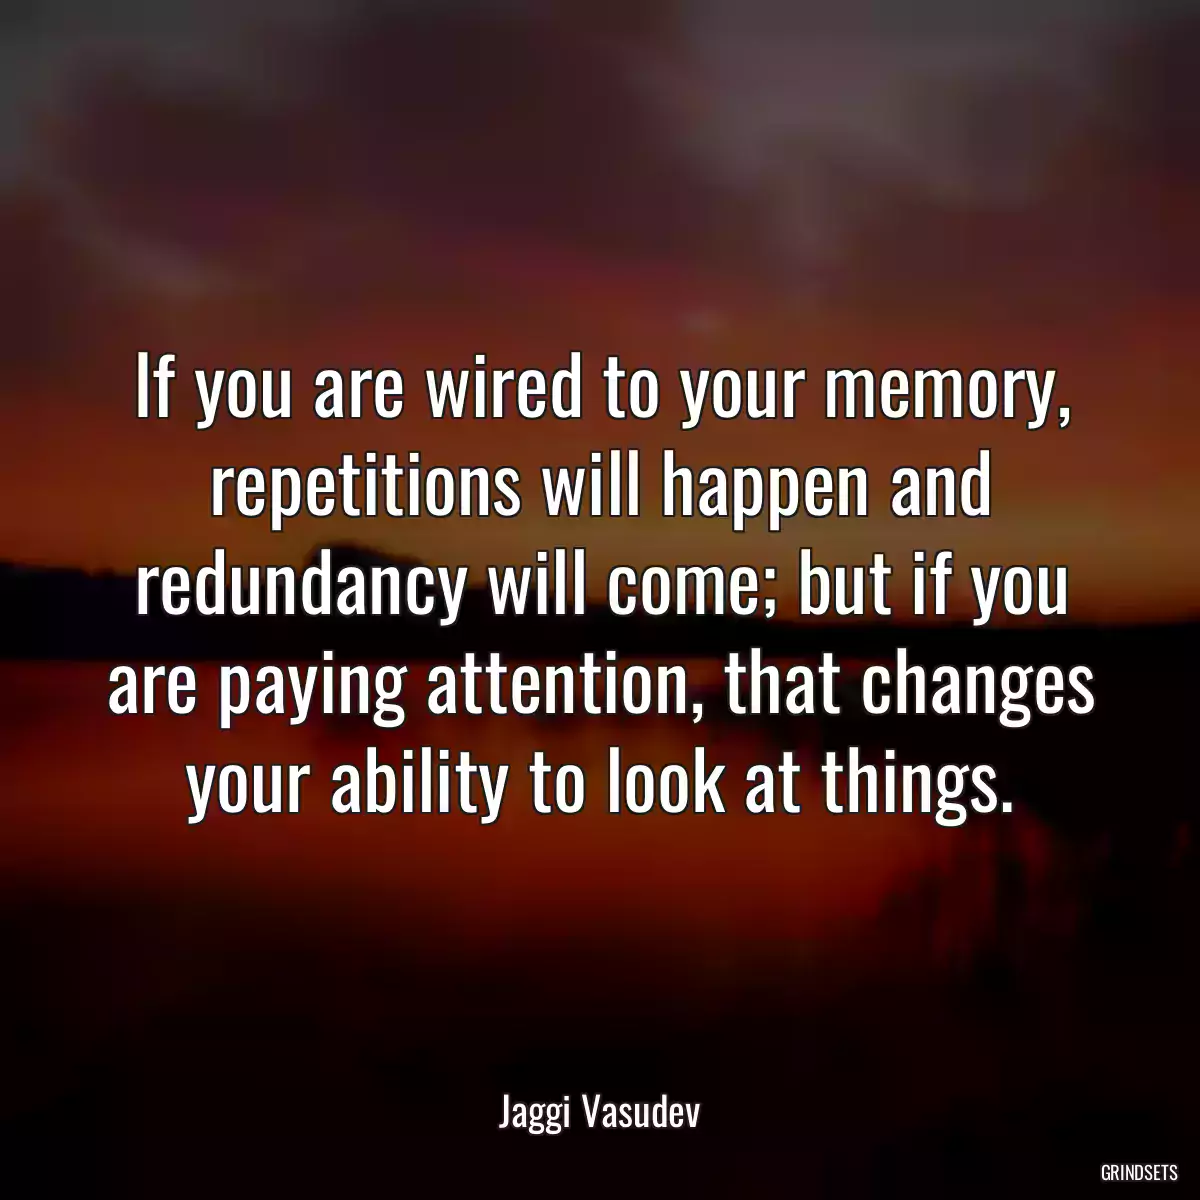 If you are wired to your memory, repetitions will happen and redundancy will come; but if you are paying attention, that changes your ability to look at things.